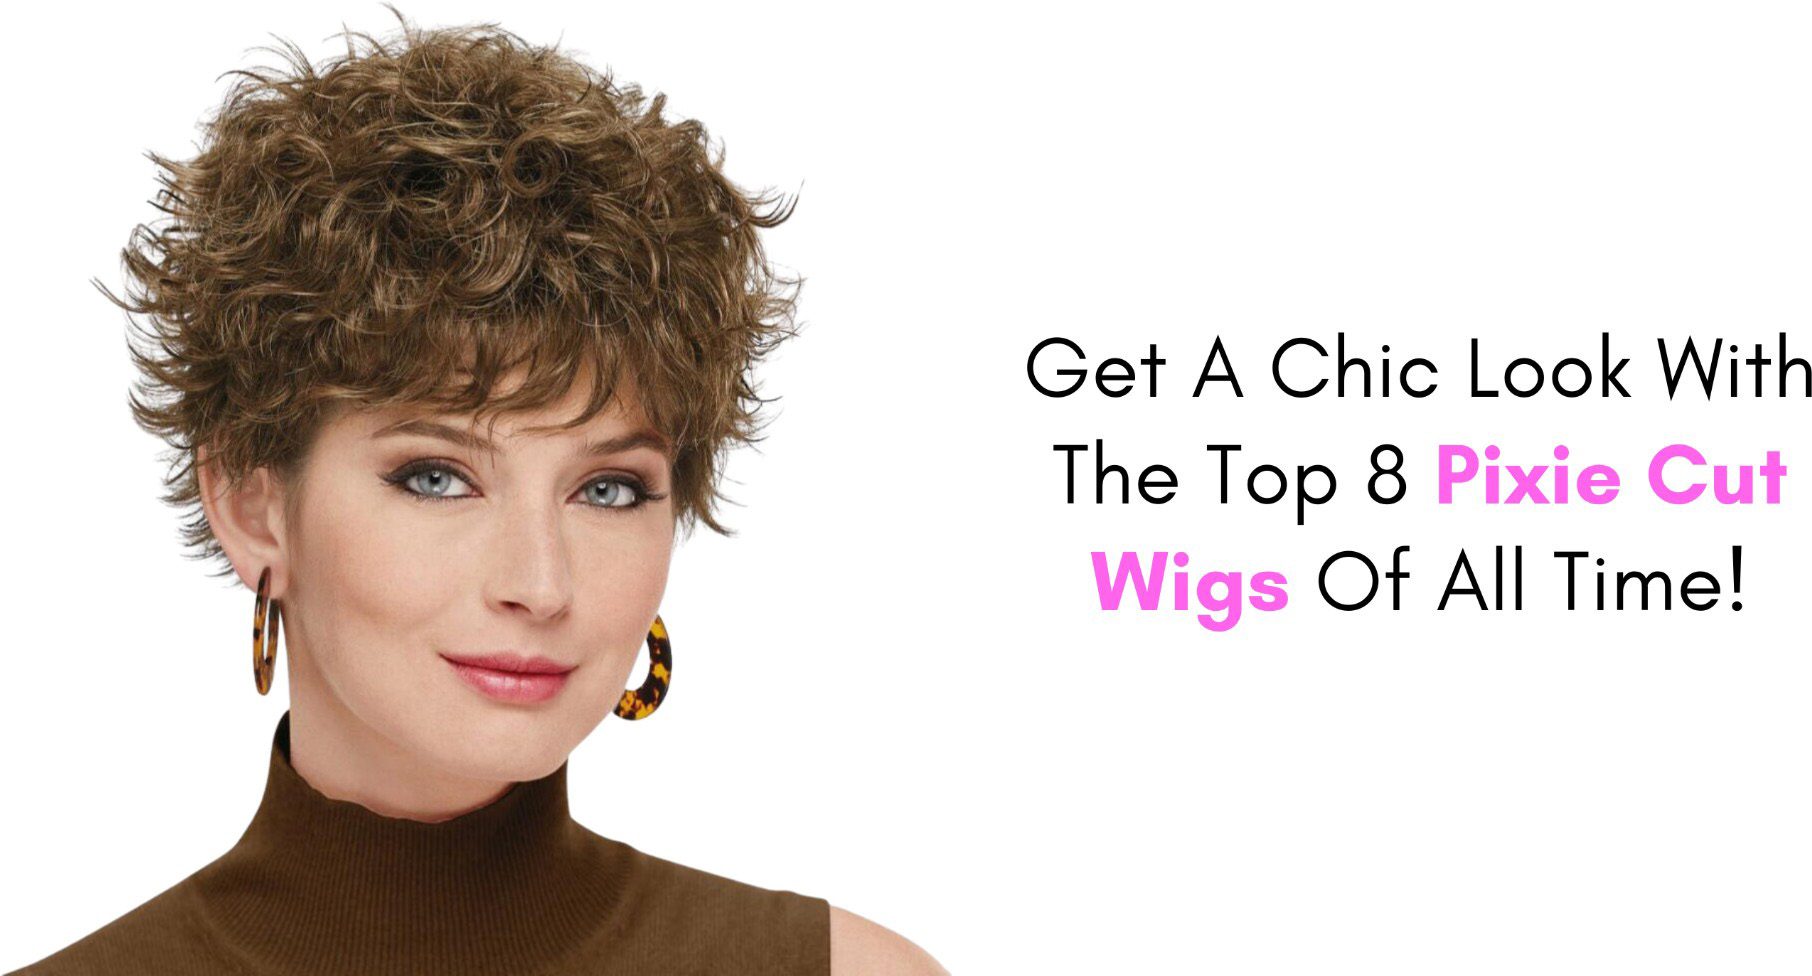 get a chic look with the top 8 pixie cut wigs of all time